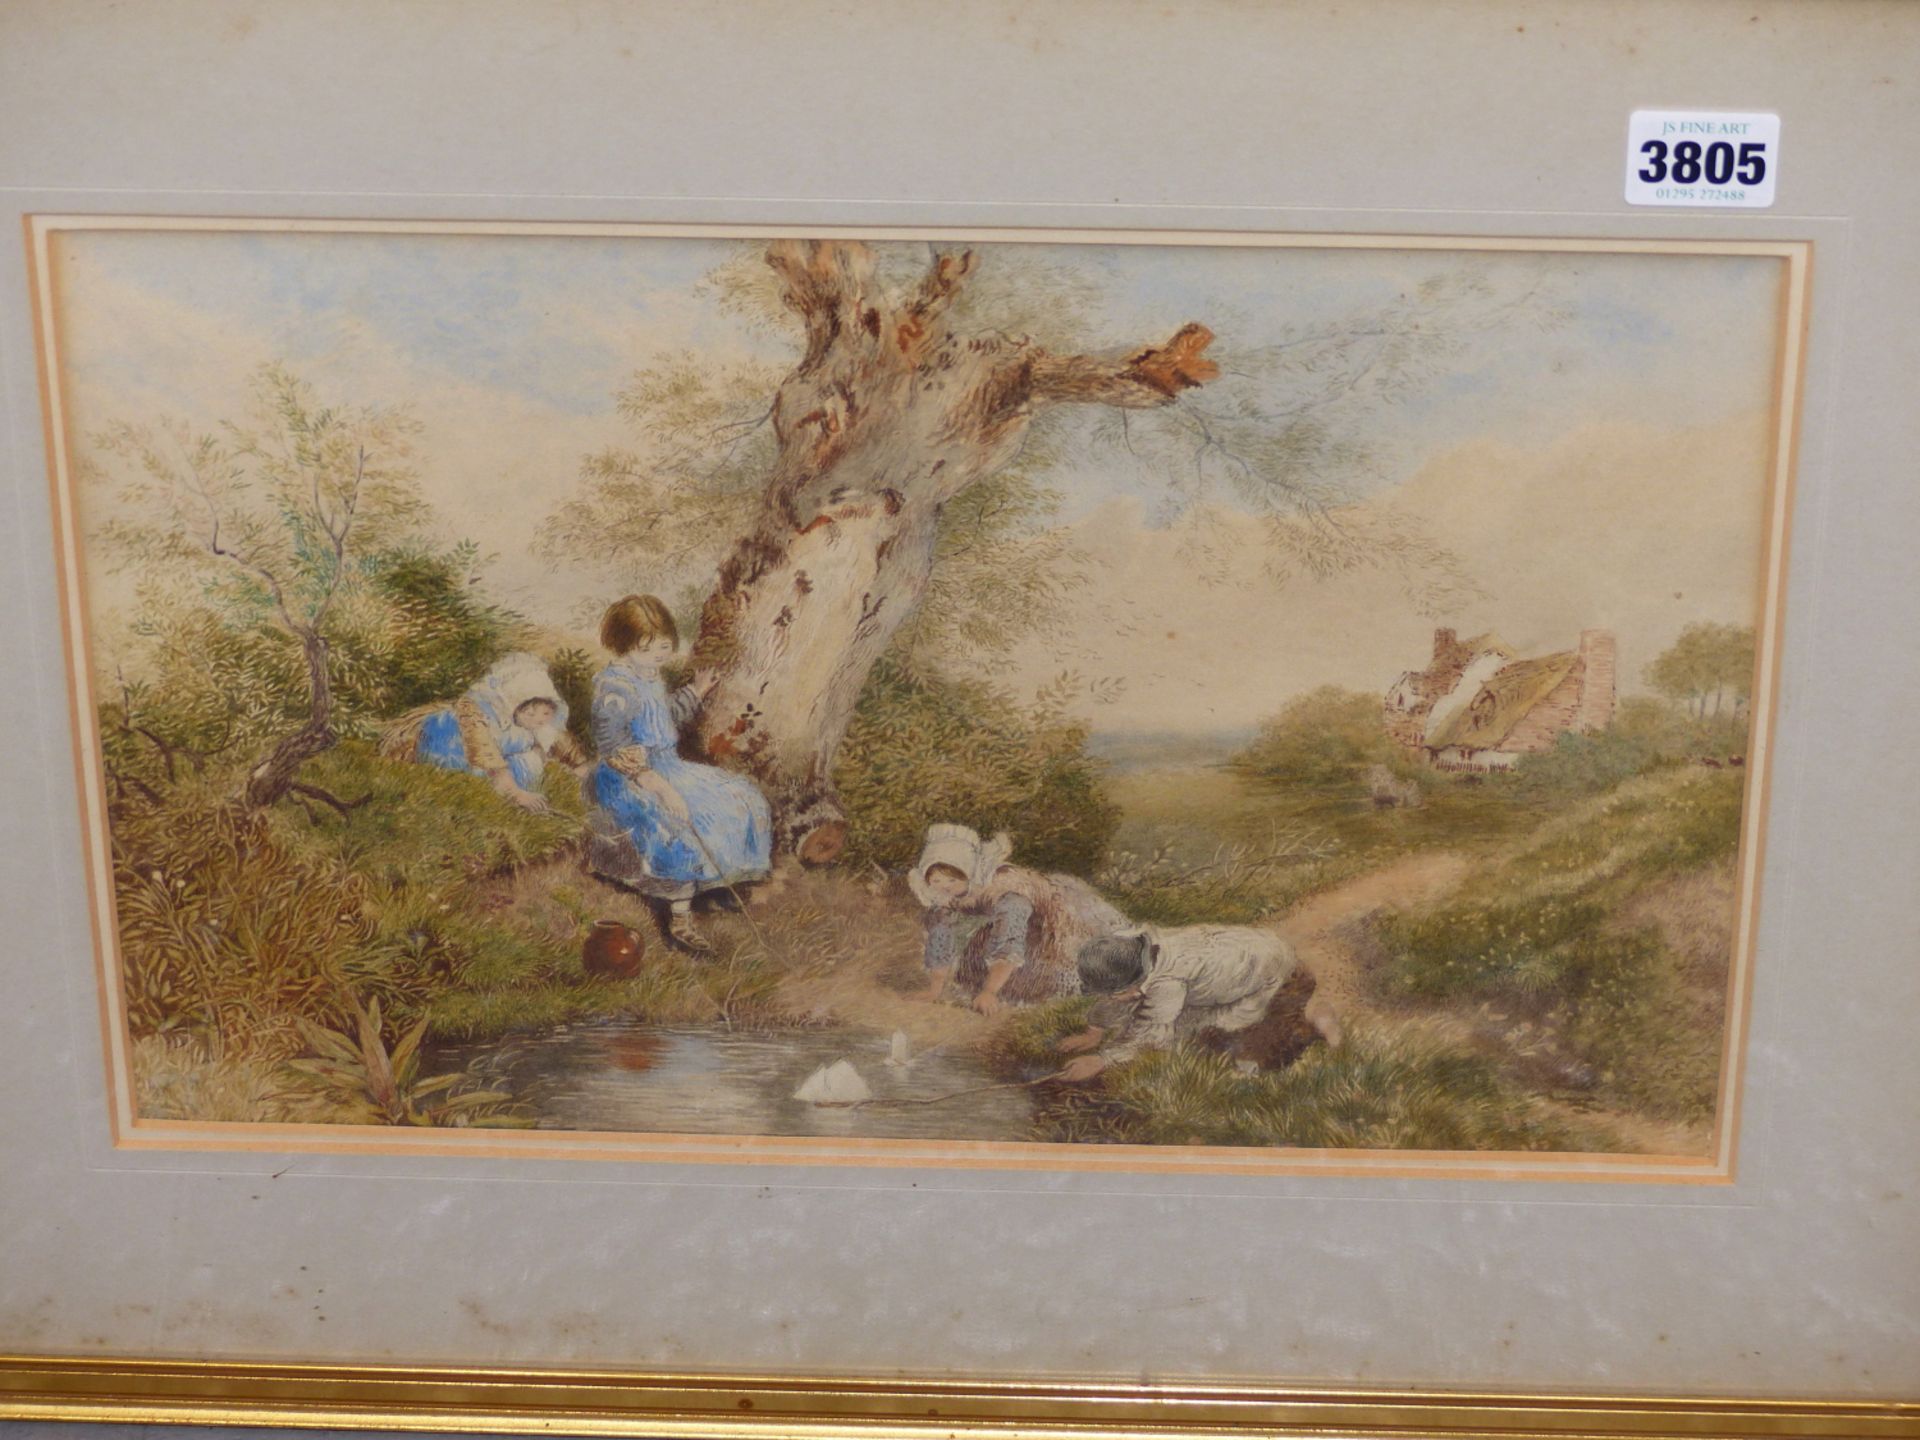 W.H.B. ( 19TH CENTURY ENGLISH SCHOOL) CHILDREN SAILING TOY BOATS ON THE POND, AND COMPANION WORK - Image 7 of 14